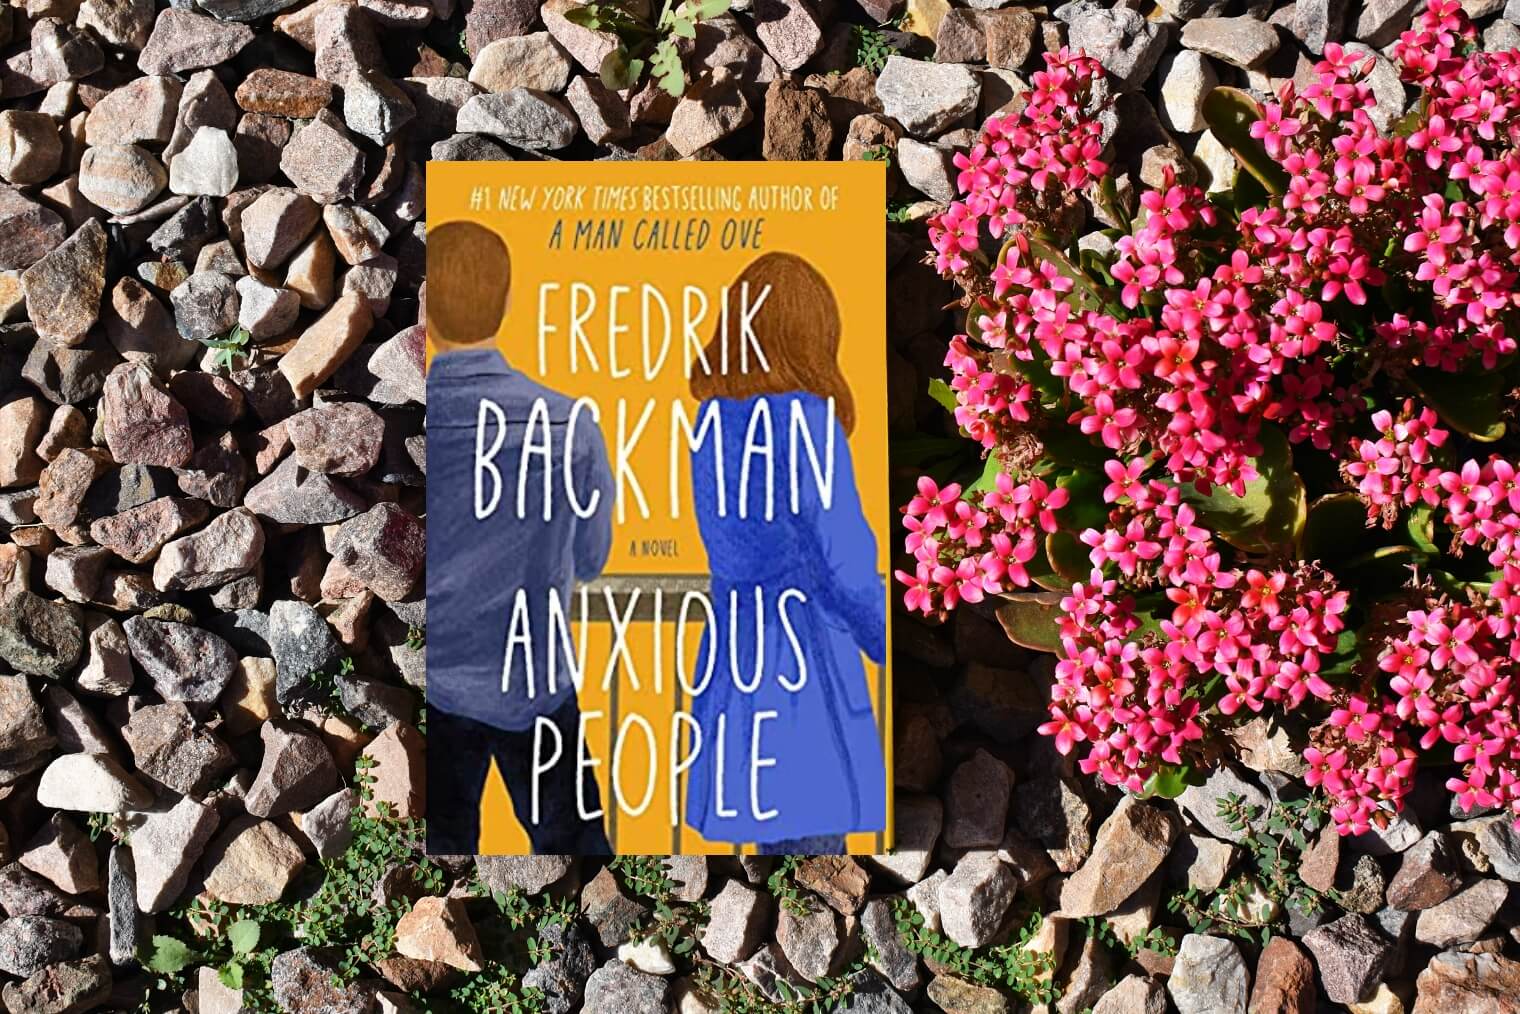 Book Club Questions for Anxious People by Fredrik Backman